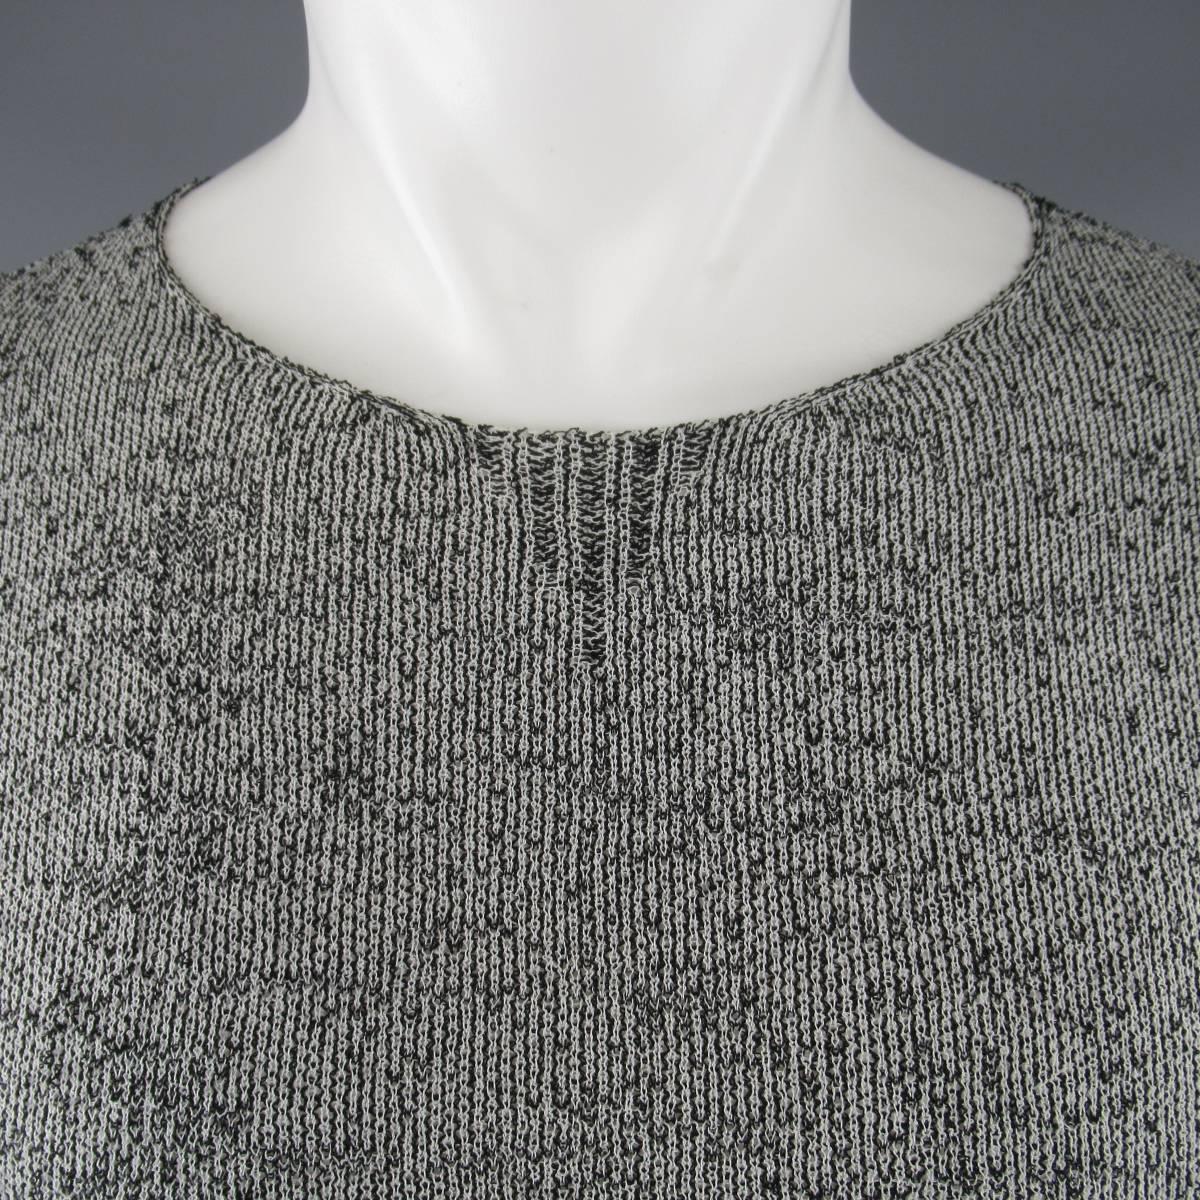 RAF SIMONS Spring/Summer 2009 Collection pullover sweater comes in a light weight,  textured black and white high contrast viscose blend knit with a crewneck, extended length, and ribbed hem. Runs very slim. Made in Belgium.
 
Excellent Pre-Owned